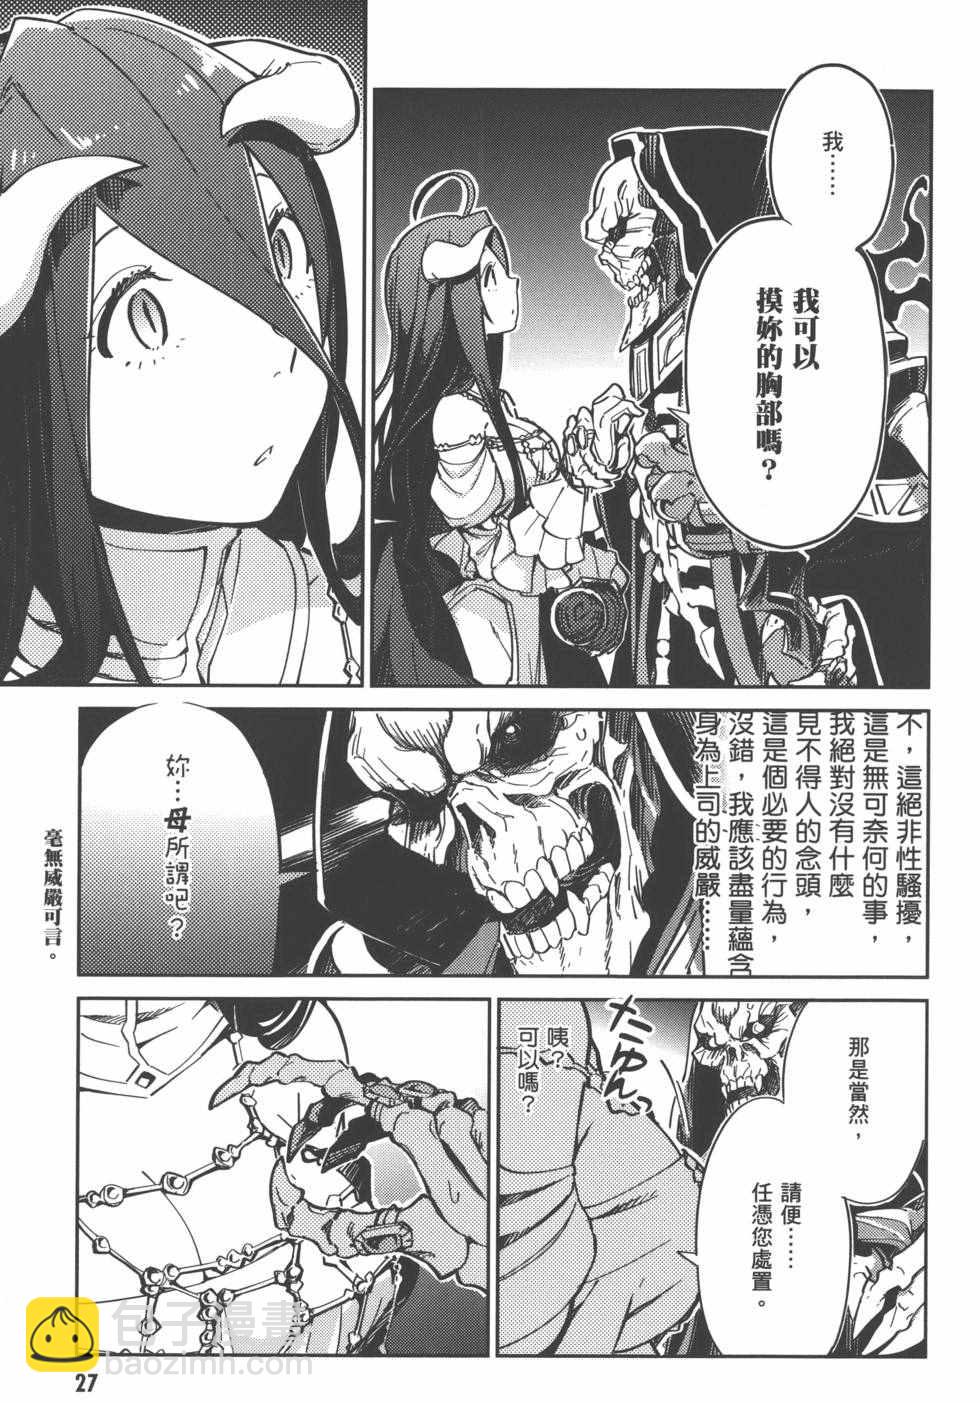 OVERLORD - 第1卷(1/4) - 5